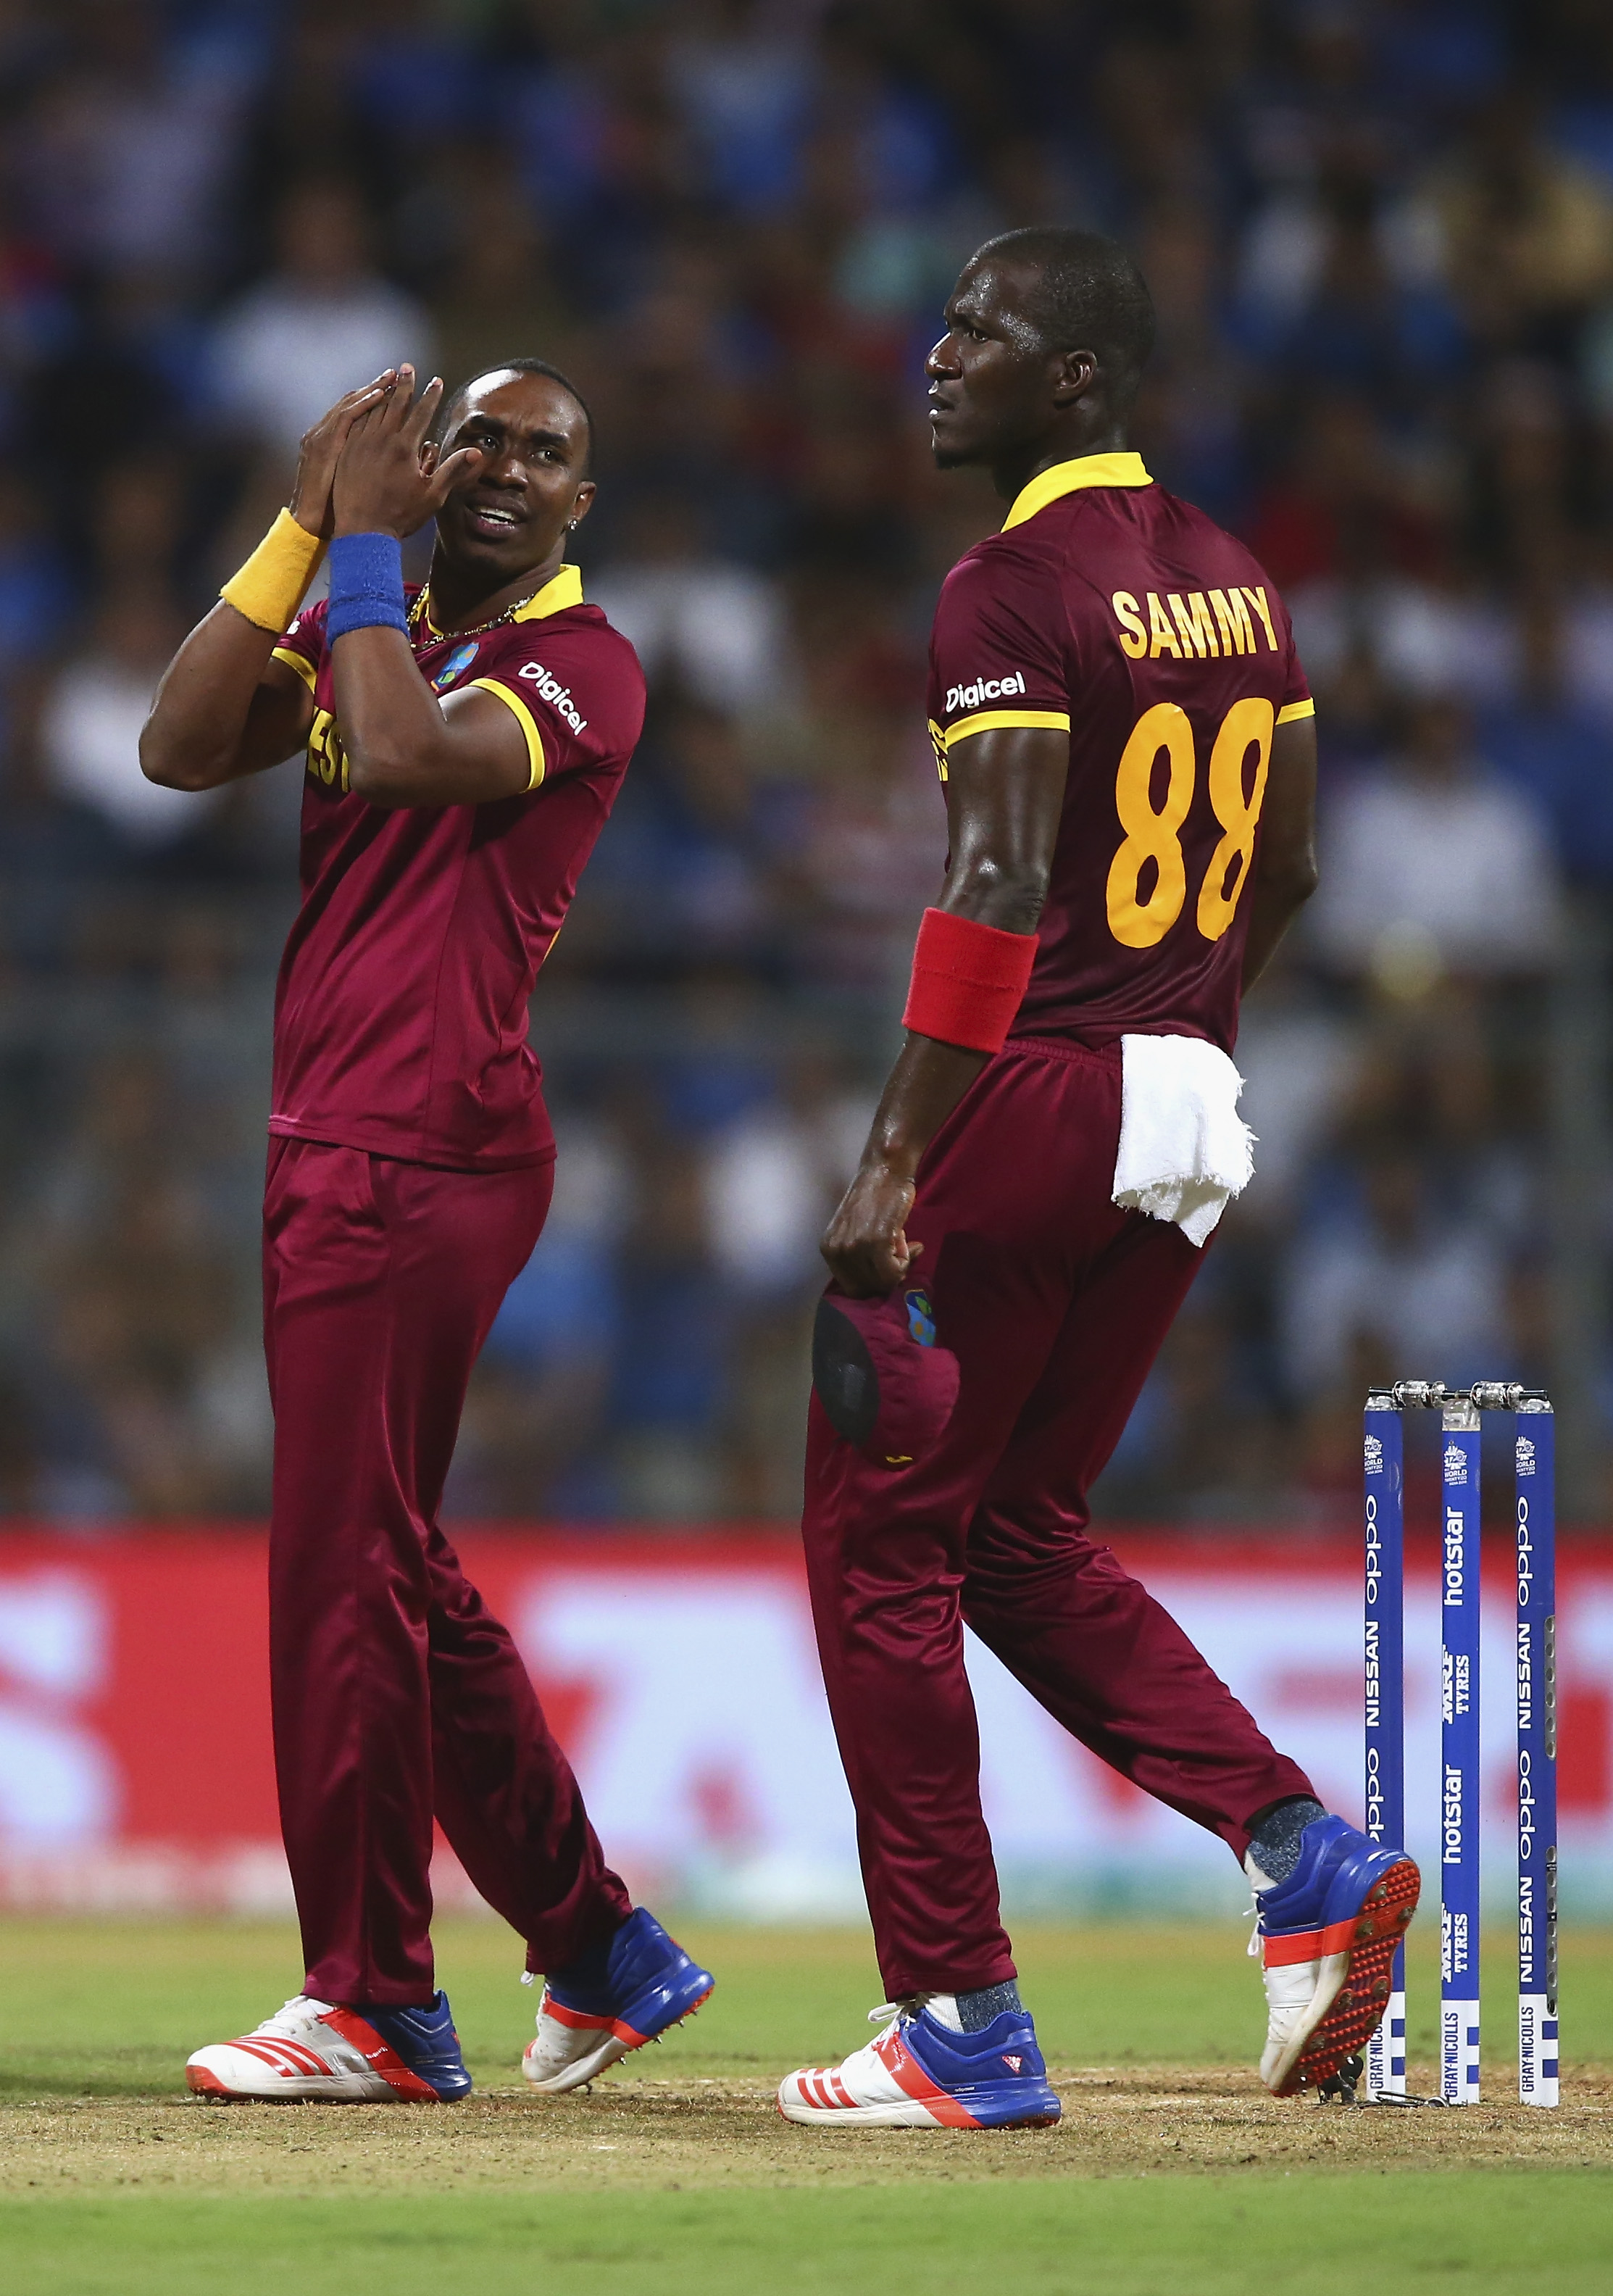 Video | Confident Dwayne Bravo dances, takes a catch and repeats the same